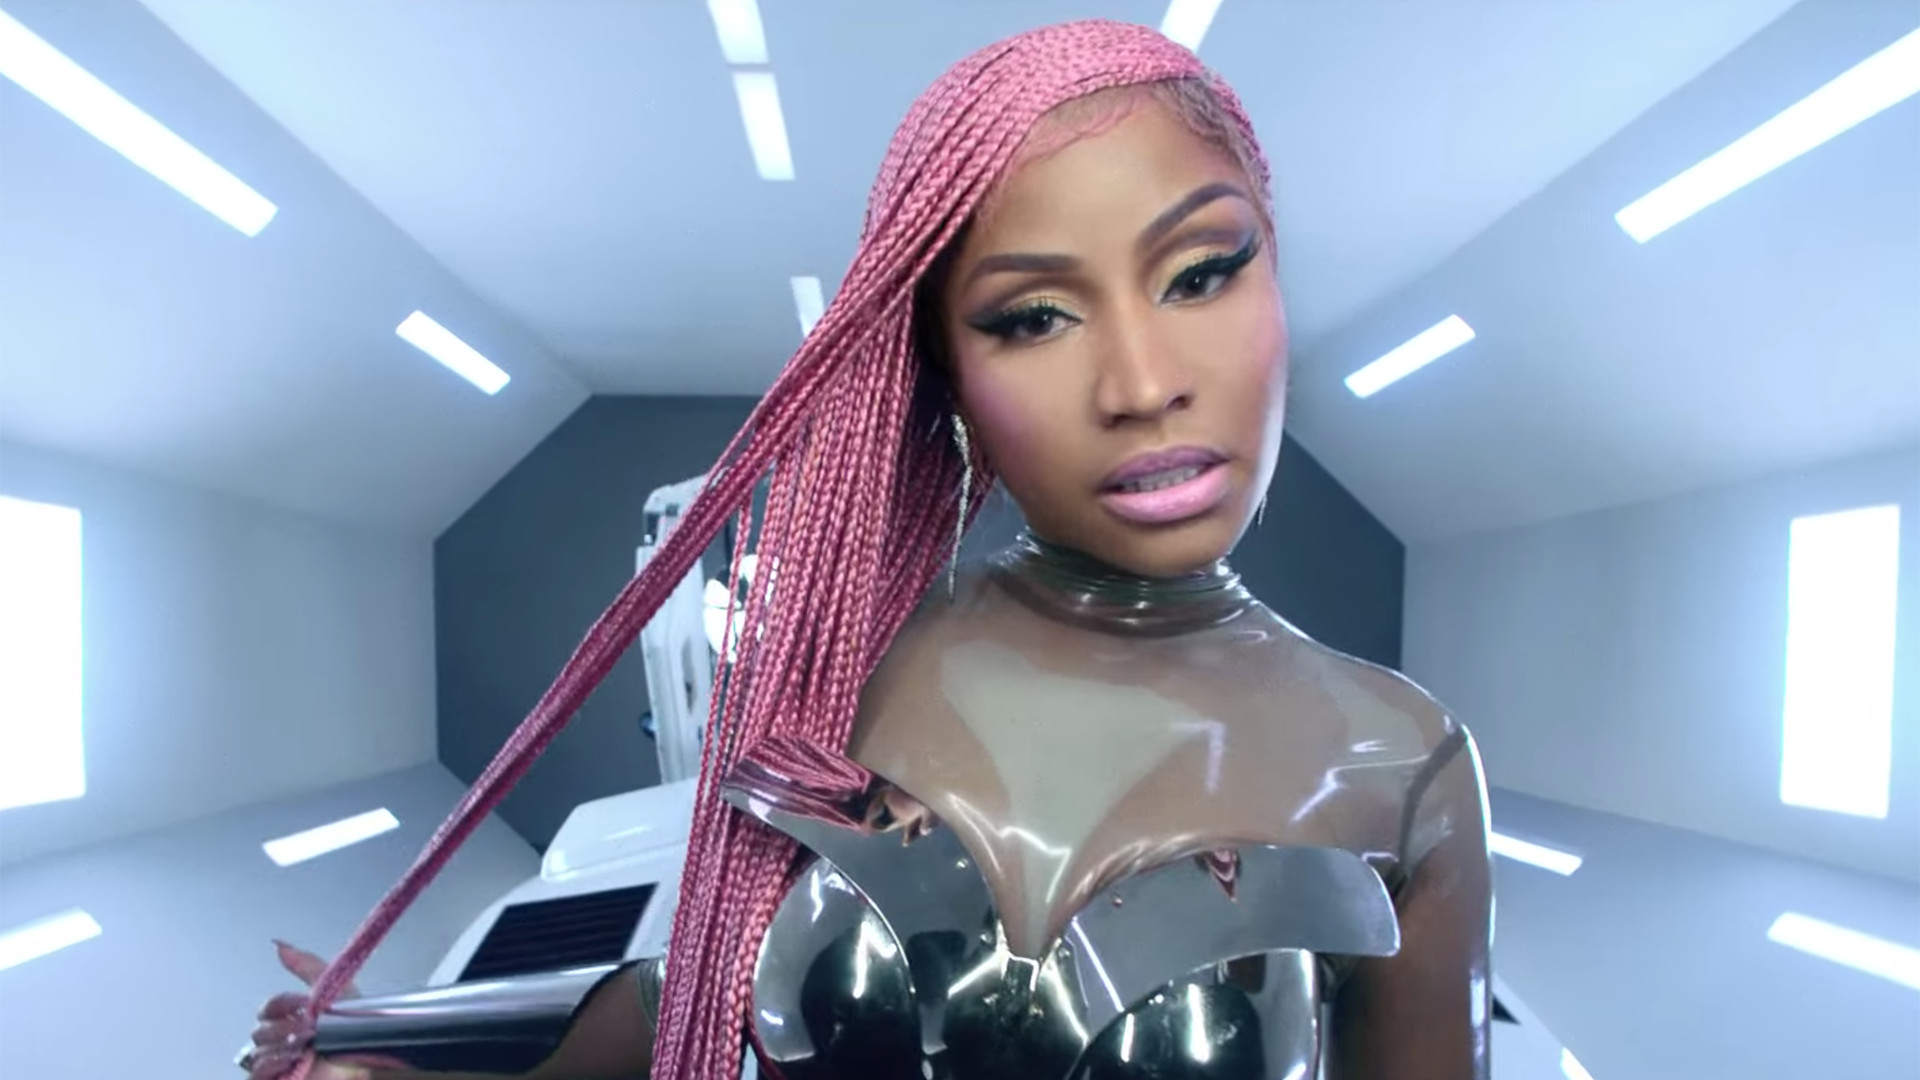 1920x1080 Nicki Minaj and Cardi B Are Futuristic Car Enthusiasts in a New Music Video  for "MotorSport" with Migos